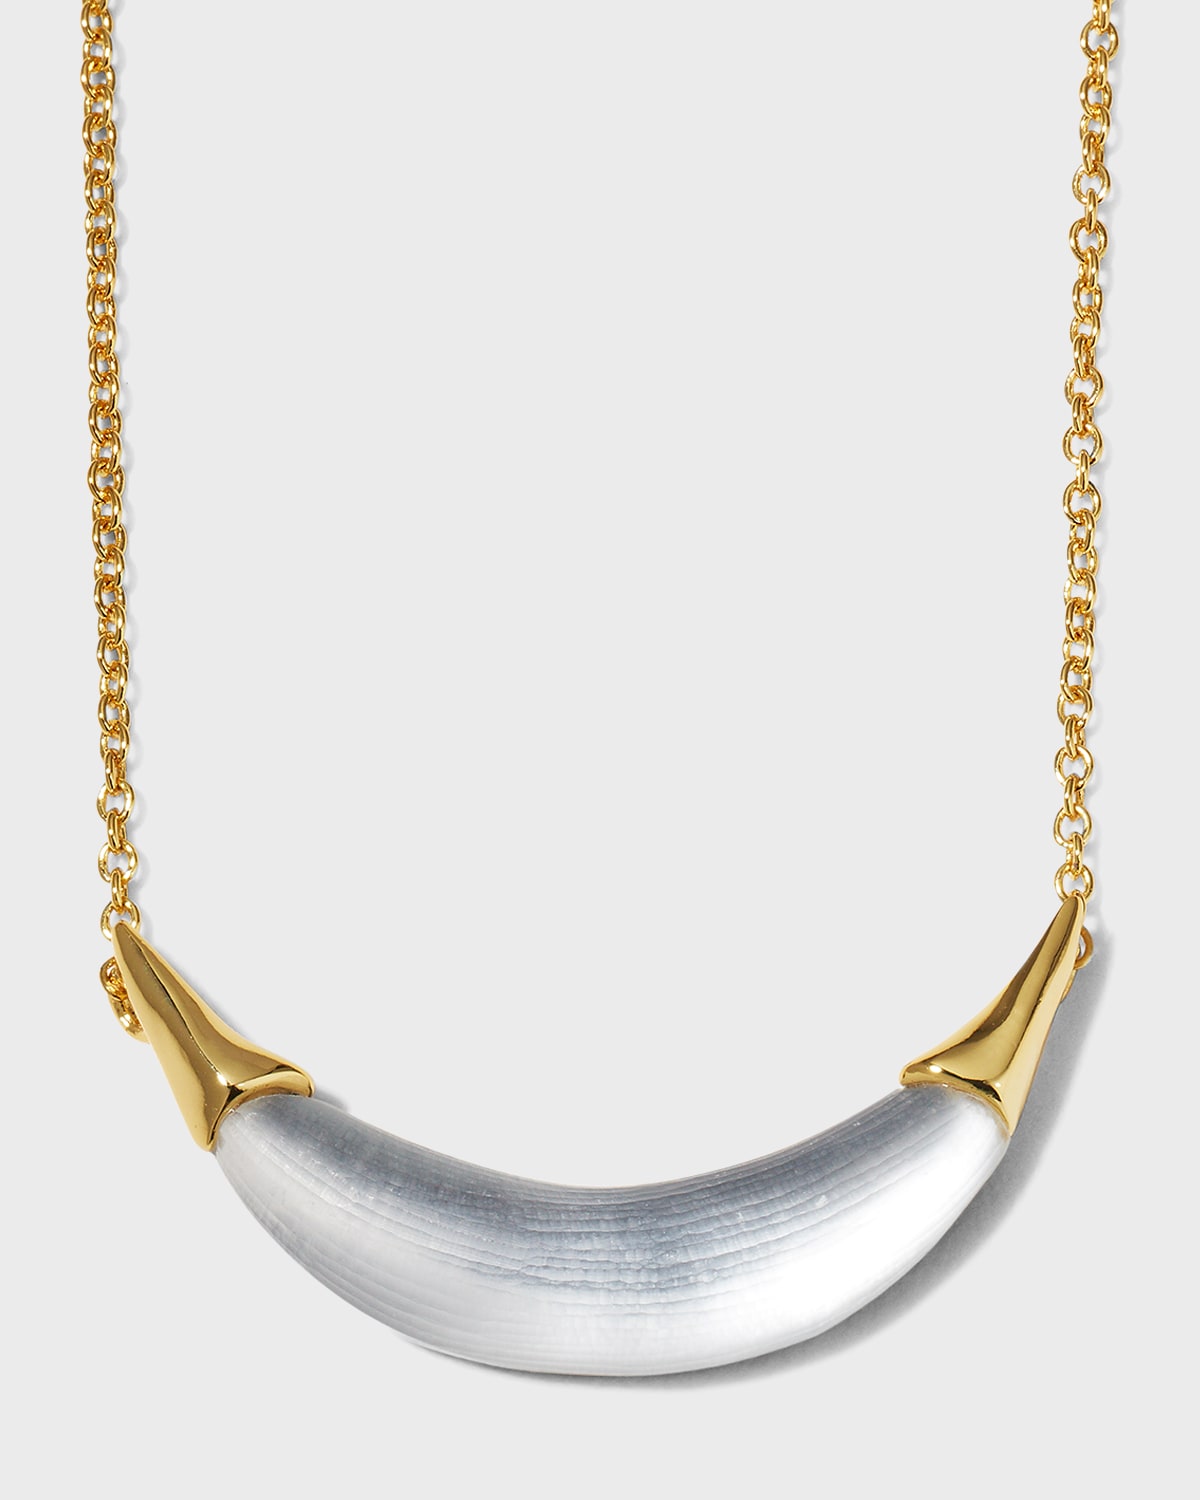 ALEXIS BITTAR GOLD CAPPED CRESCENT NECKLACE